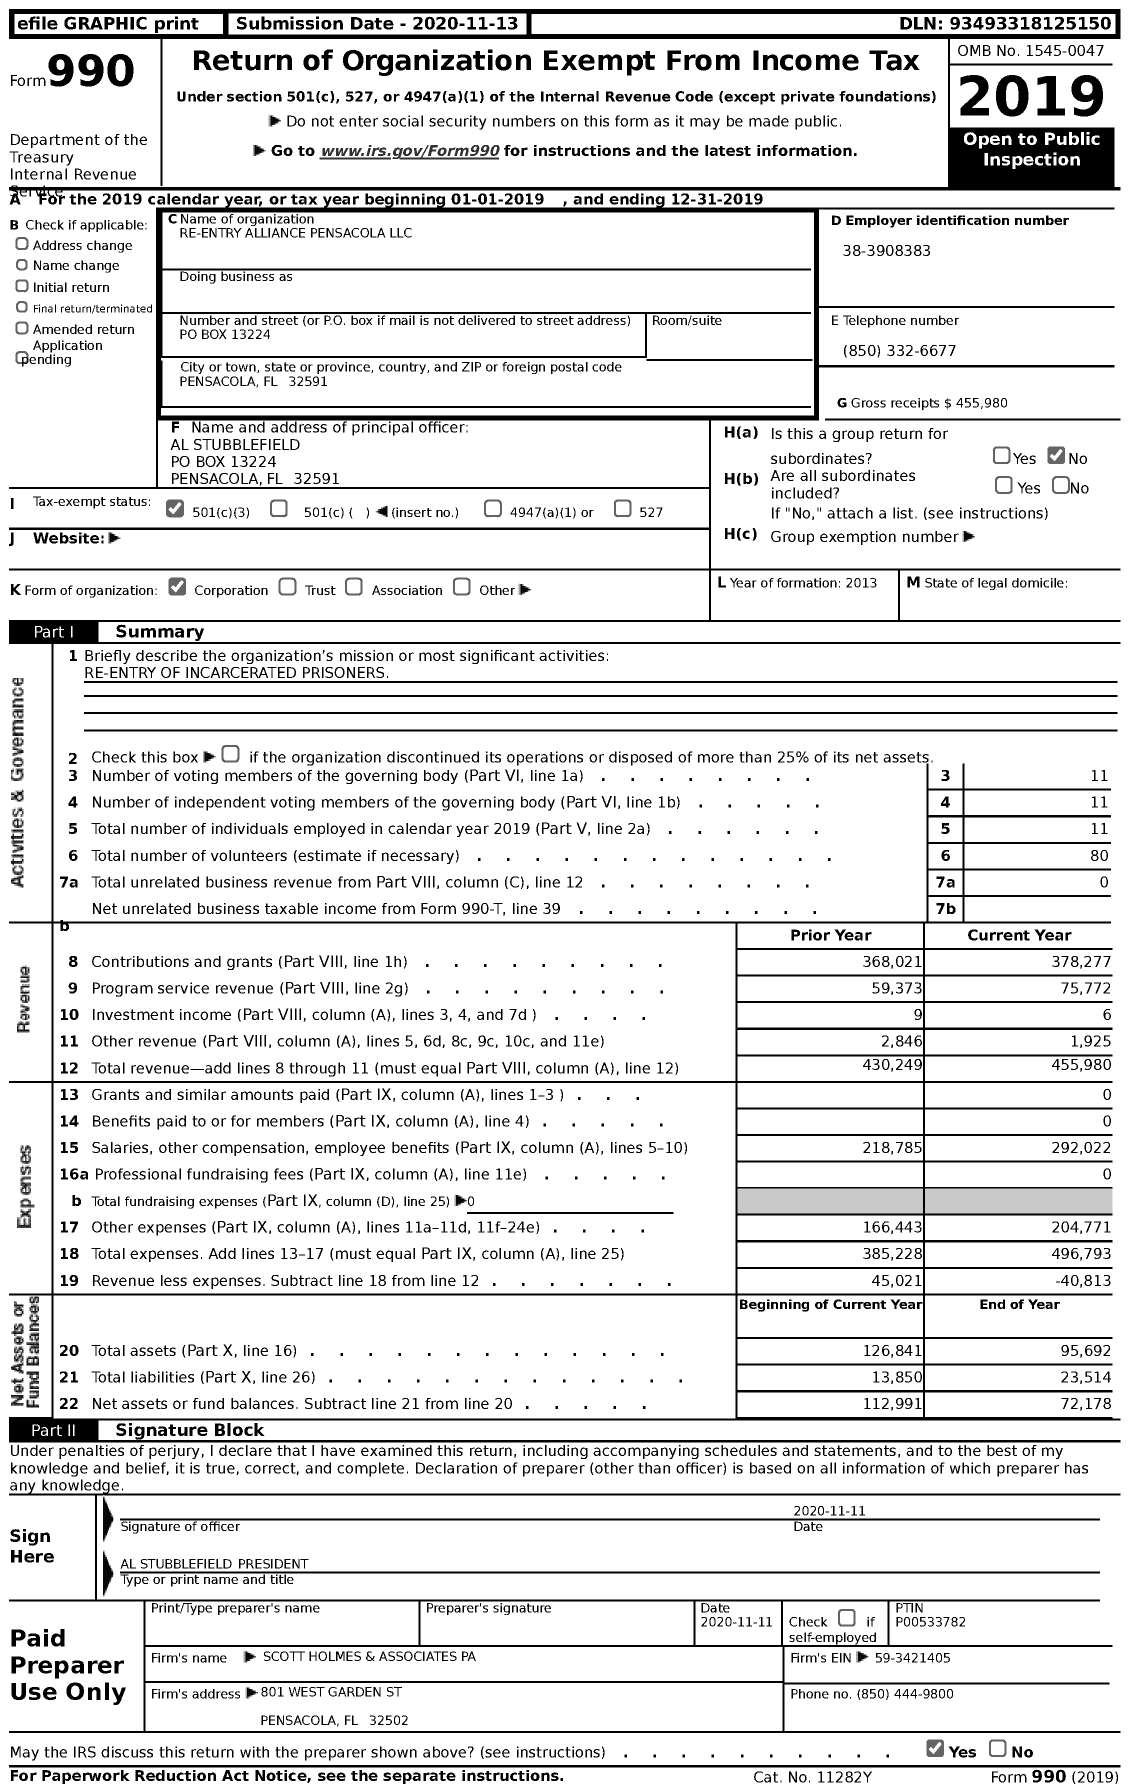 Image of first page of 2019 Form 990 for Re-Entry Alliance Pensacola (REAP)